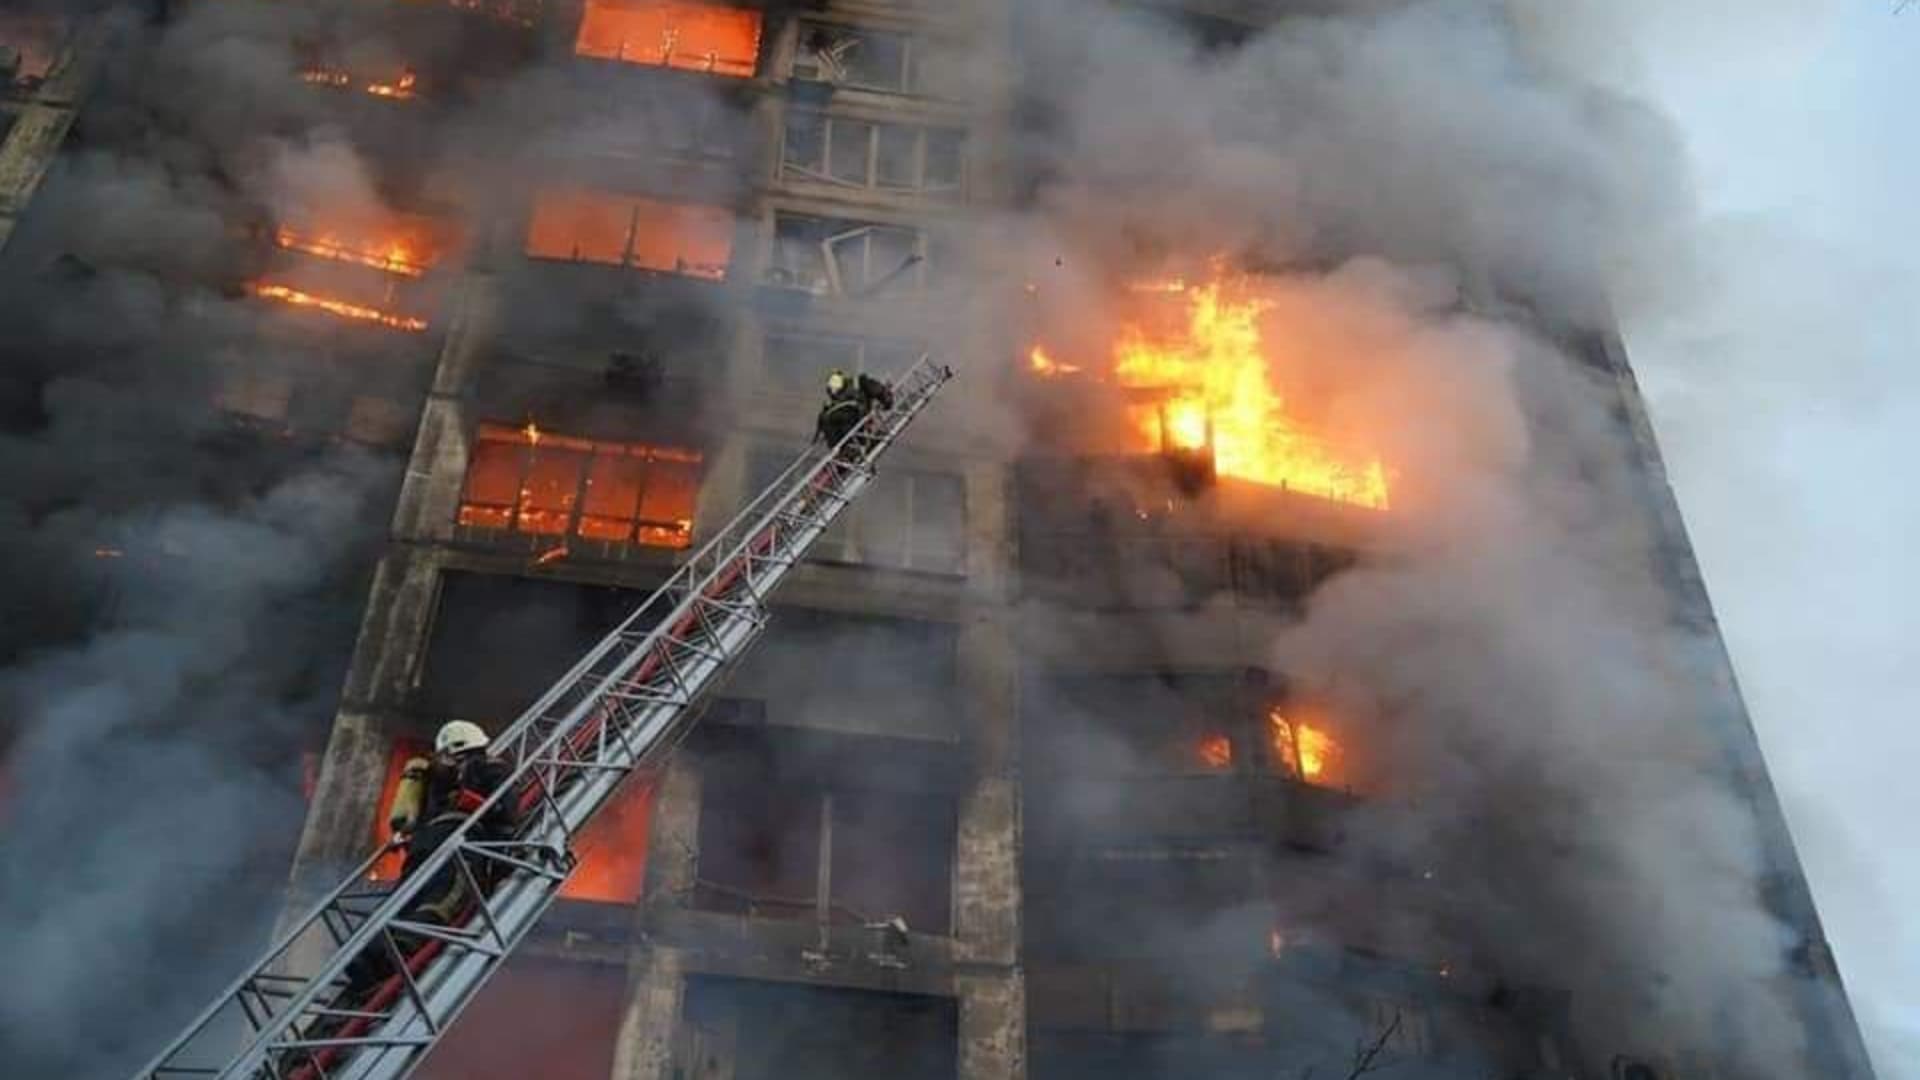 Firefighters try to extinguish a fire after a residential building hit by a Russian attack in Kyiv, Ukraine on March 15, 2022.